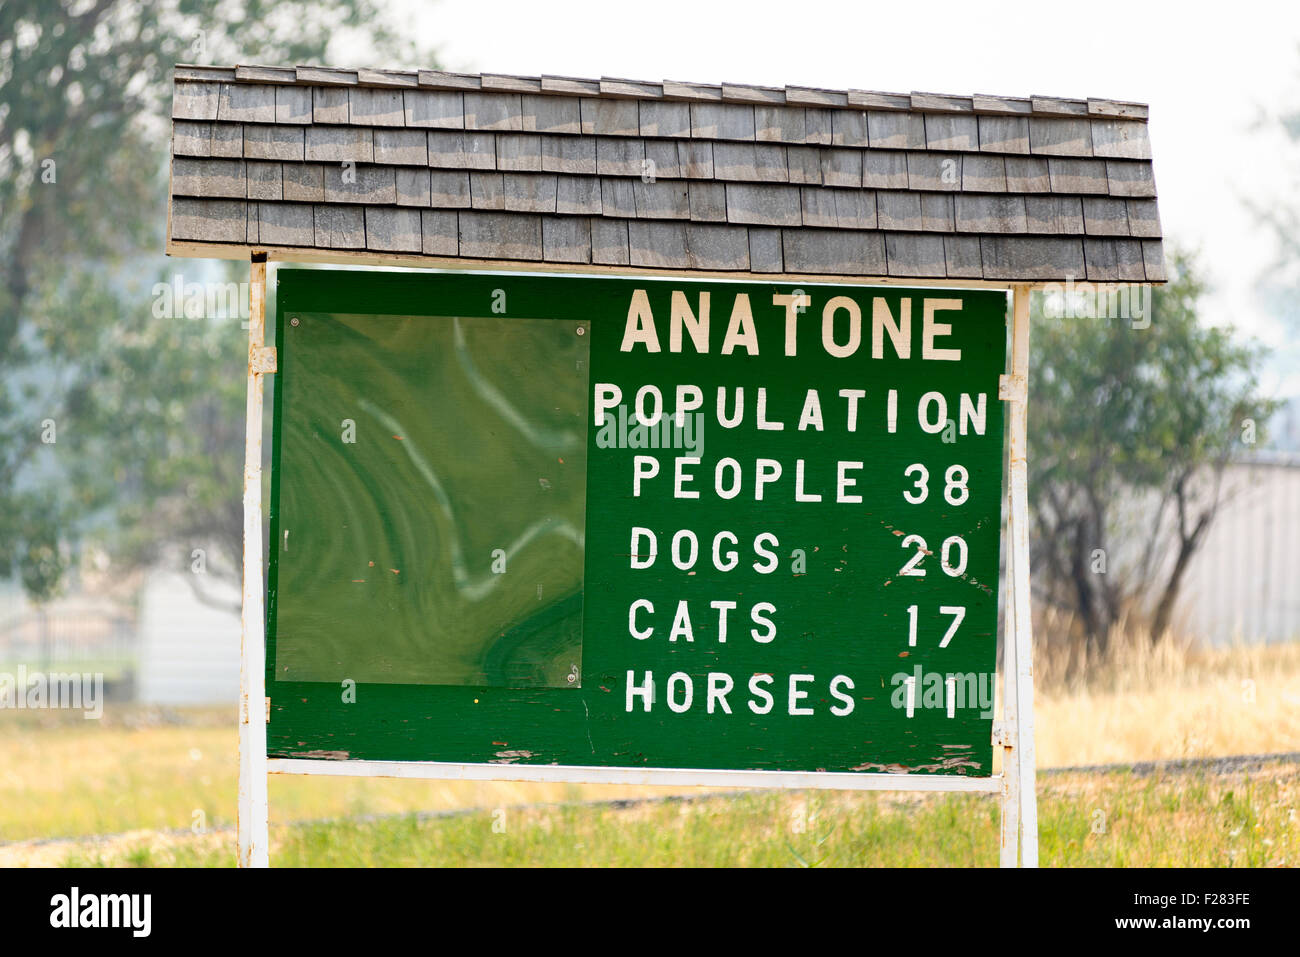 Population sign in the small town of Anatone, Washington. Stock Photo